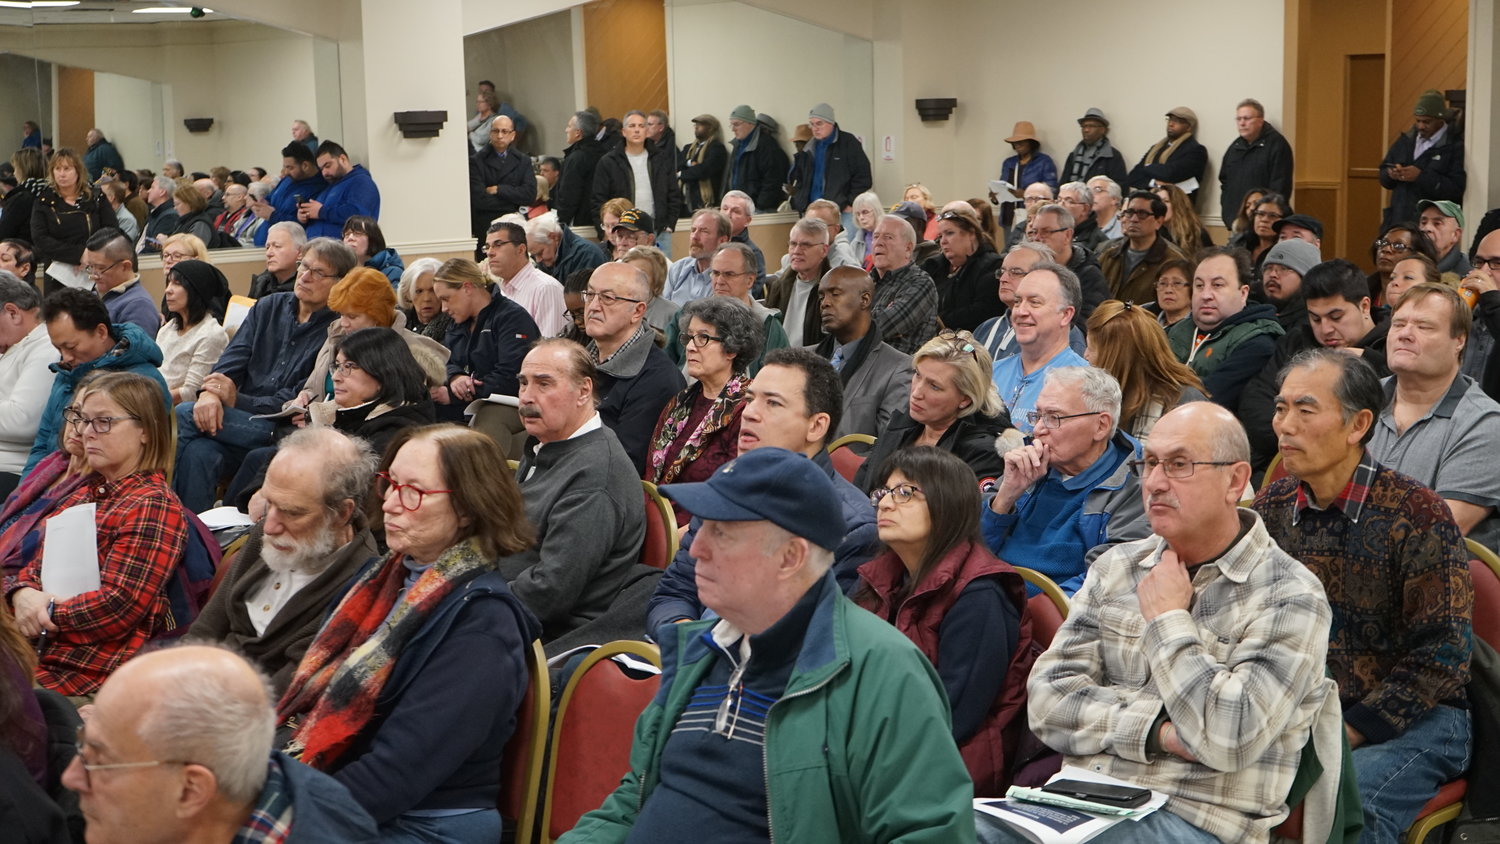 More than 100 residents crowded the Valley Stream American Legion on Jan. 9 for a meeting on Nassau County’s tax assessment overhaul.